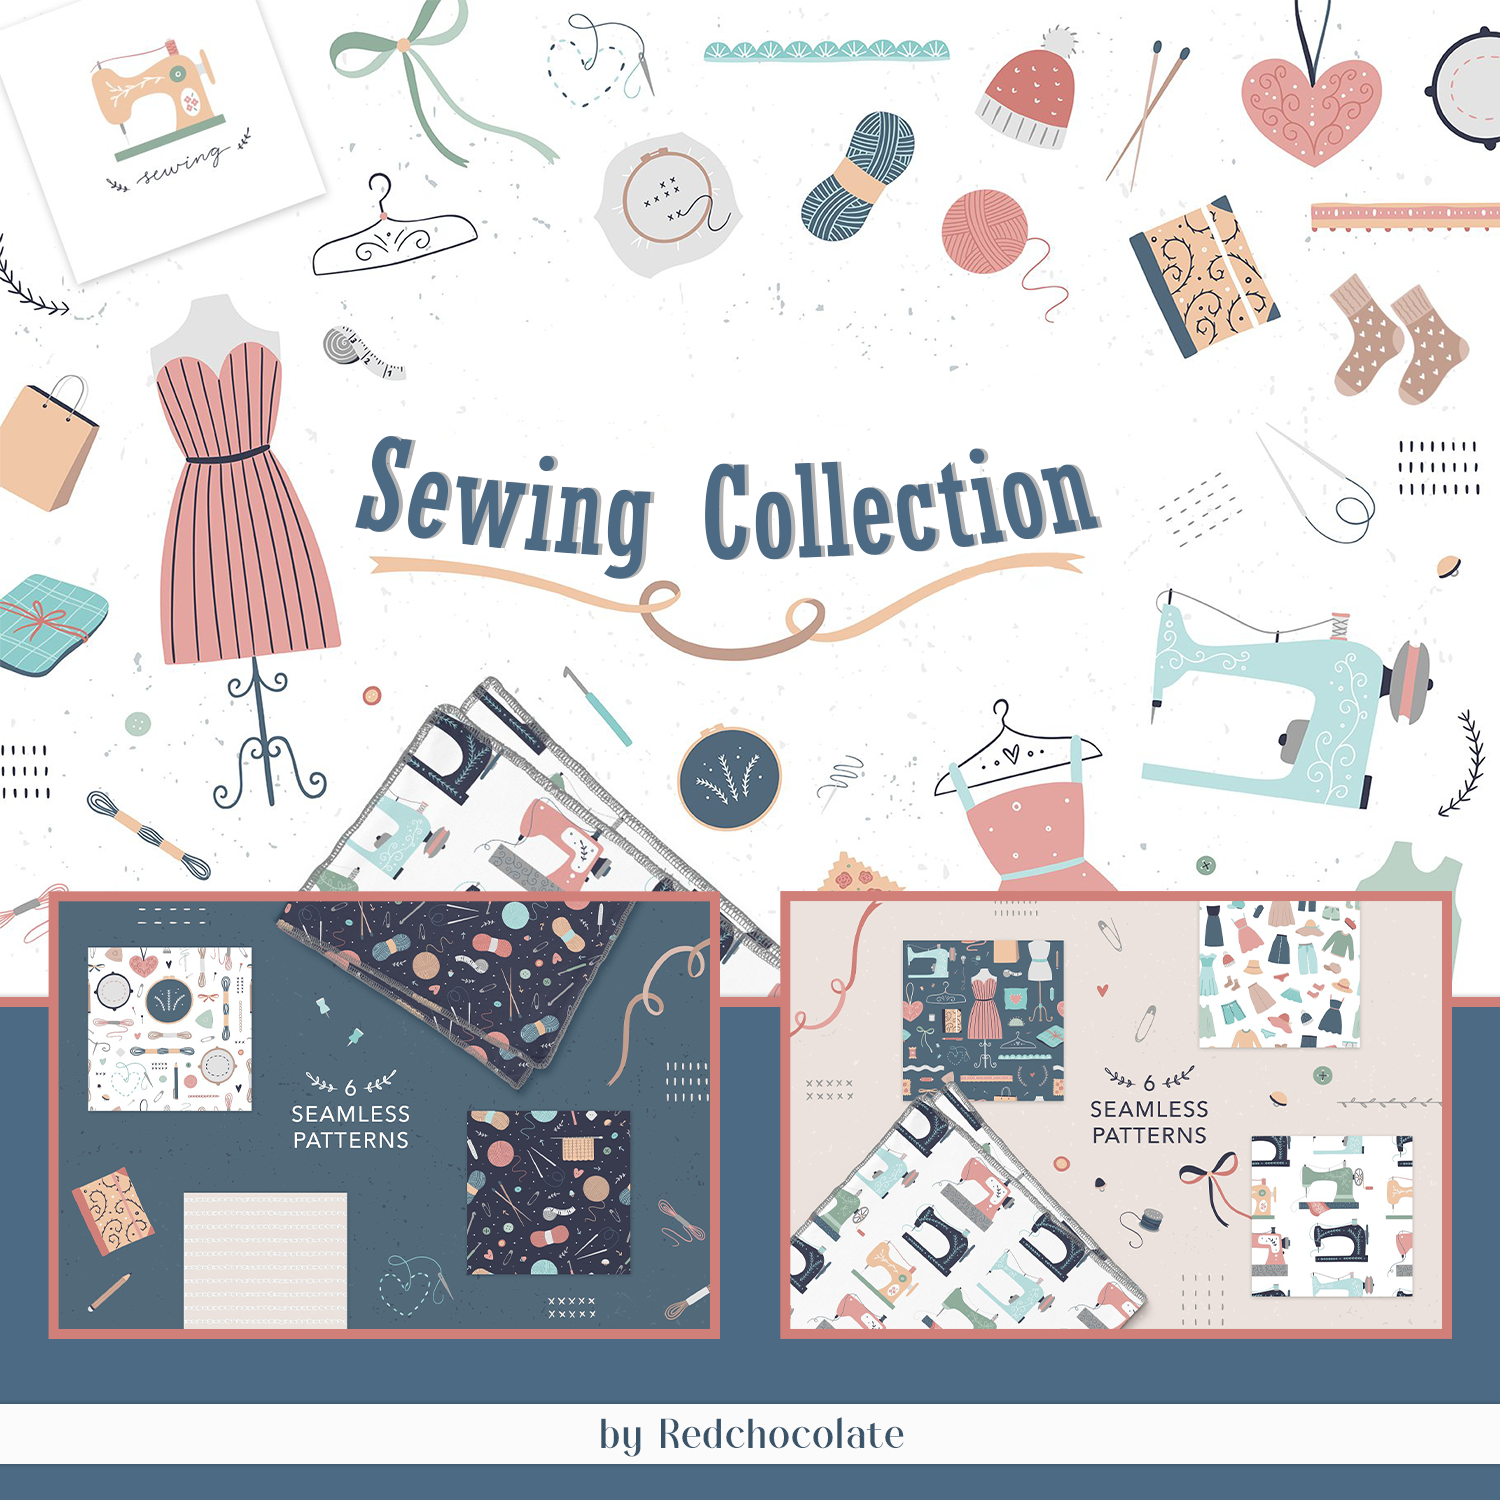 Sewing collection preview.